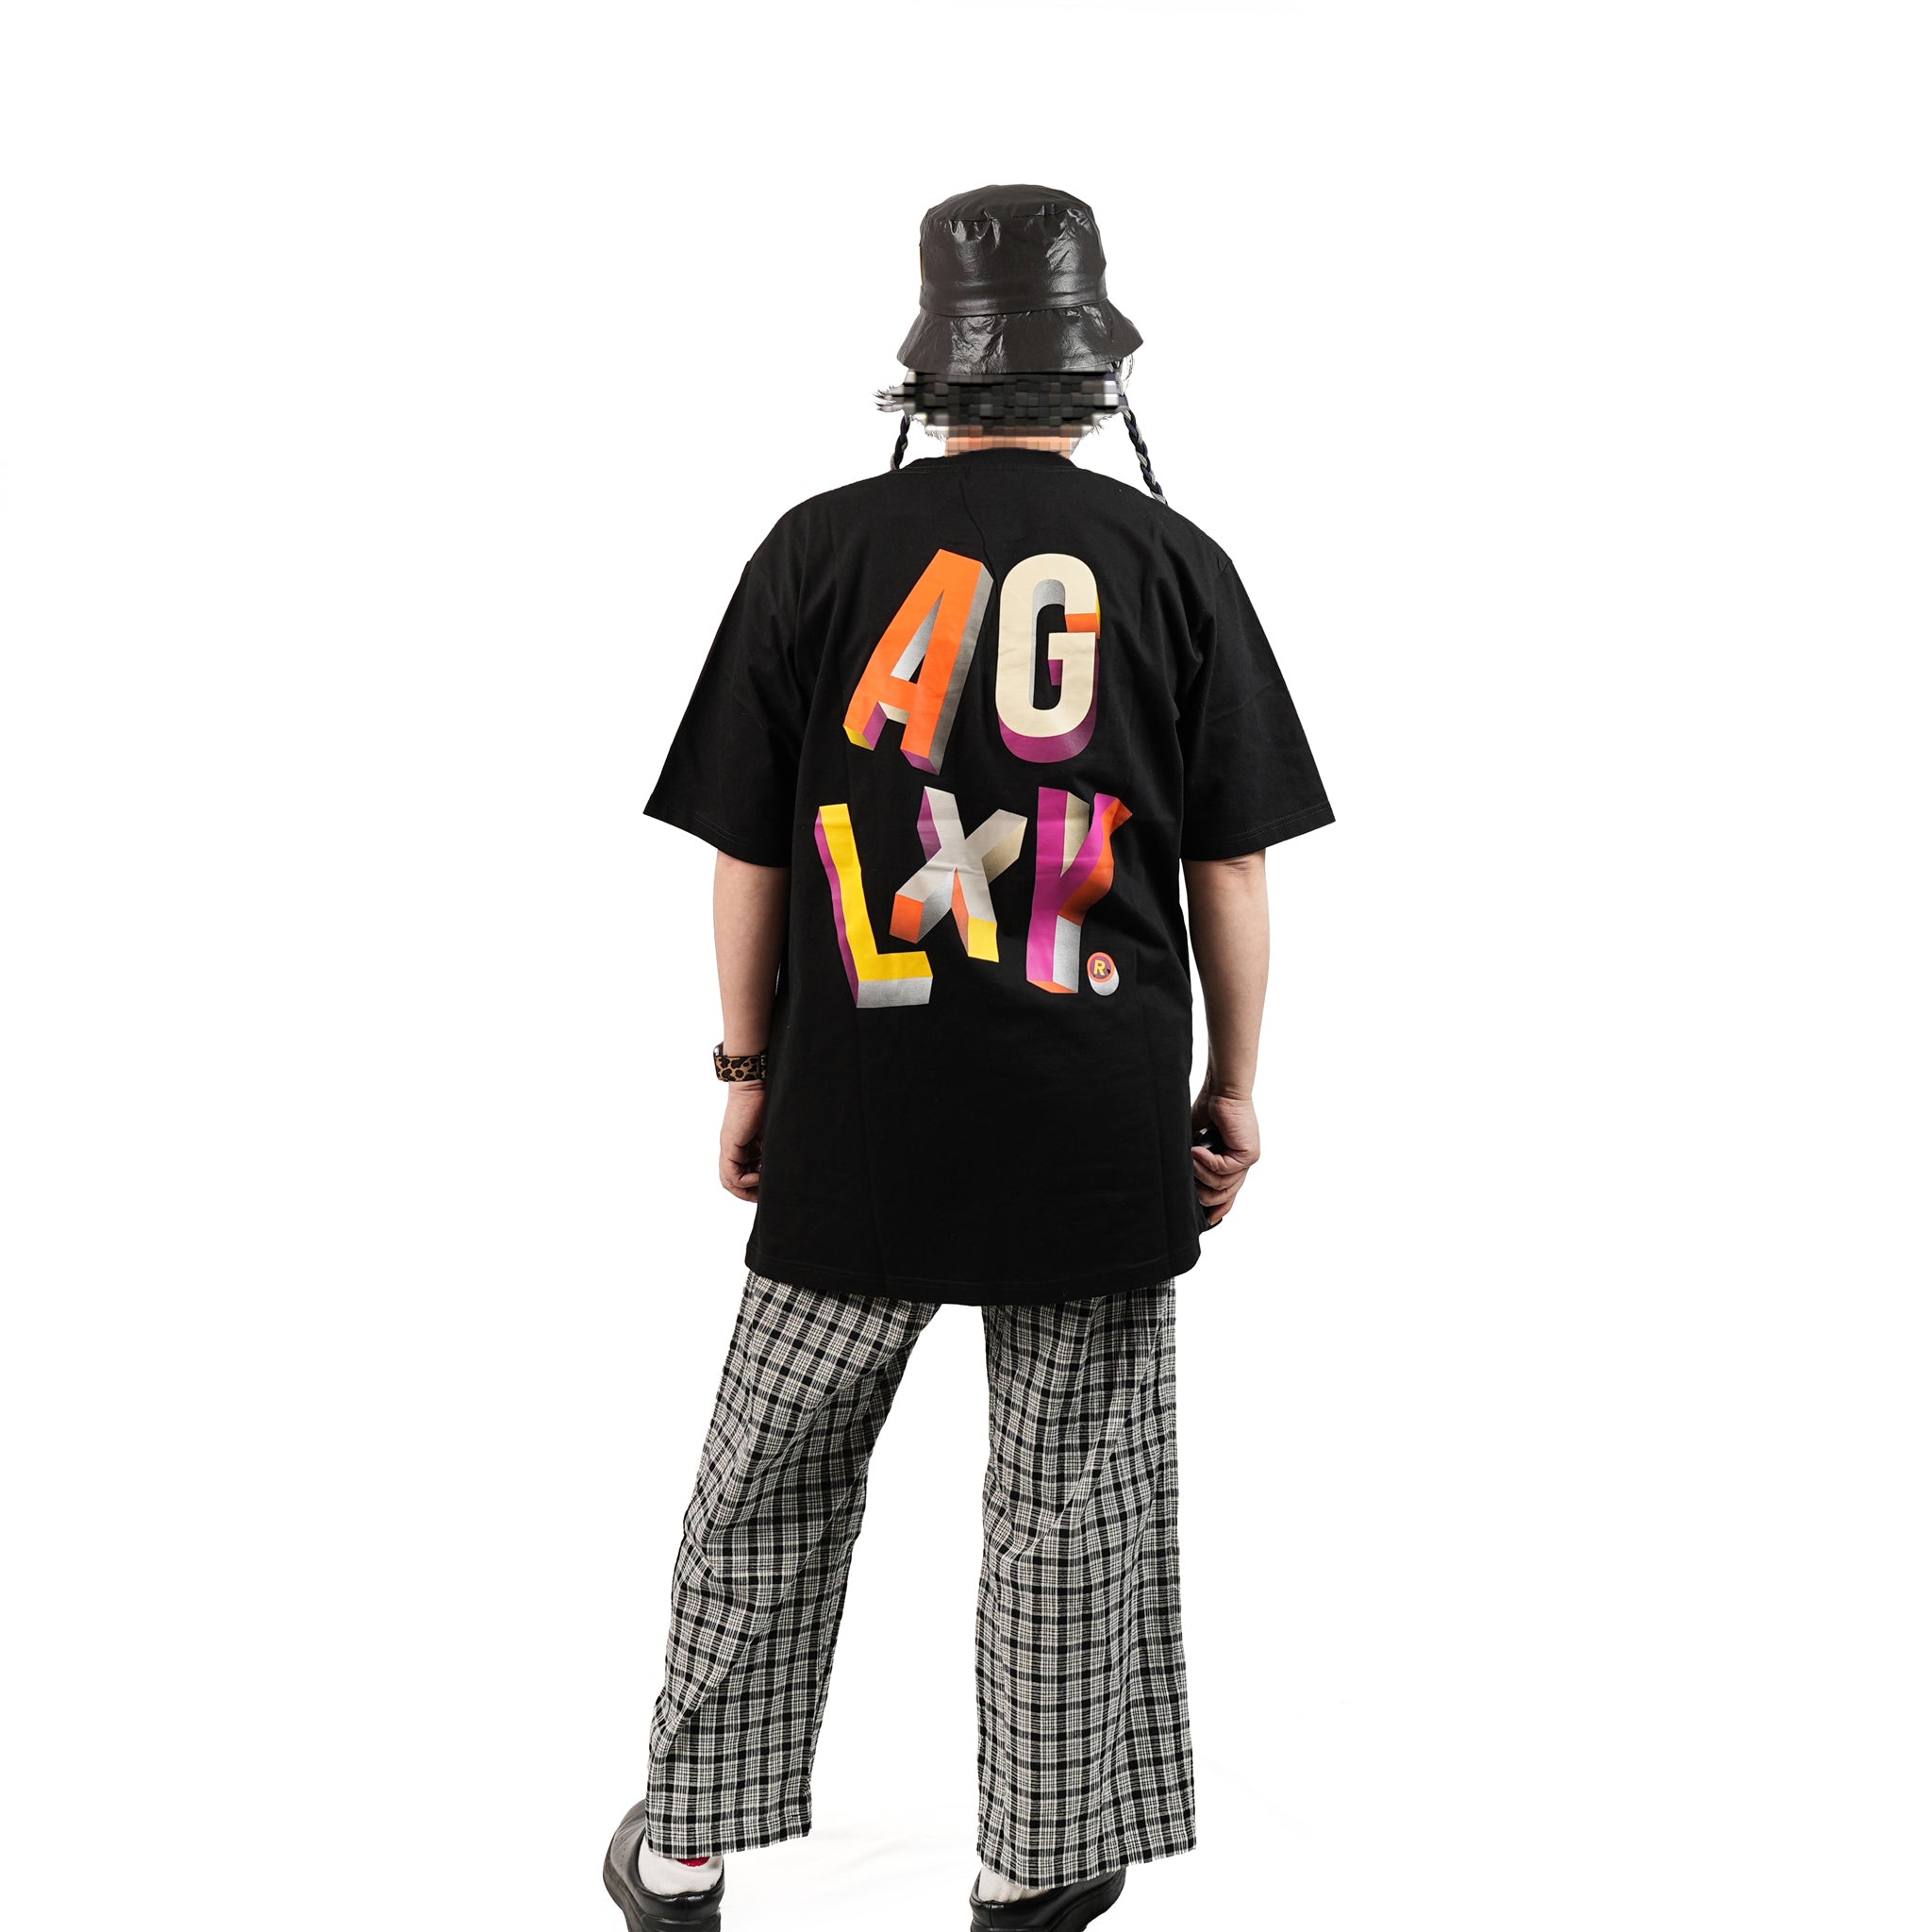 No:TSAG139 | Name:Whatever it Takes 015 S/S TEE | Color:Black【AGELESS GALAXY_エイジレスギャラクシー】【ネコポス選択可能】